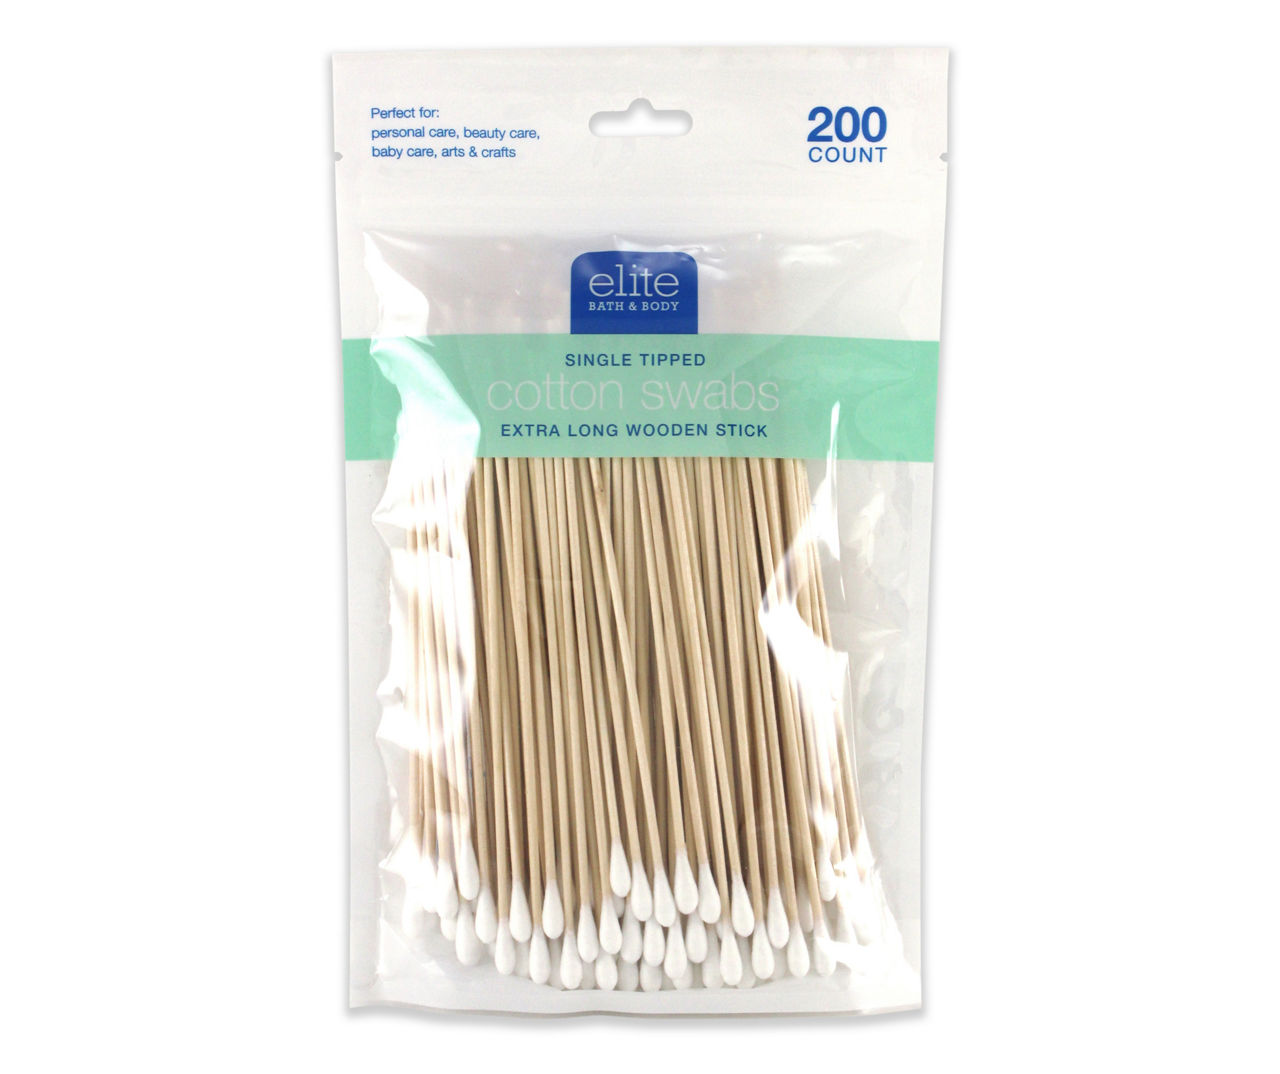 Elite Extra Long Wood Stick Cotton Swabs, 200-Count